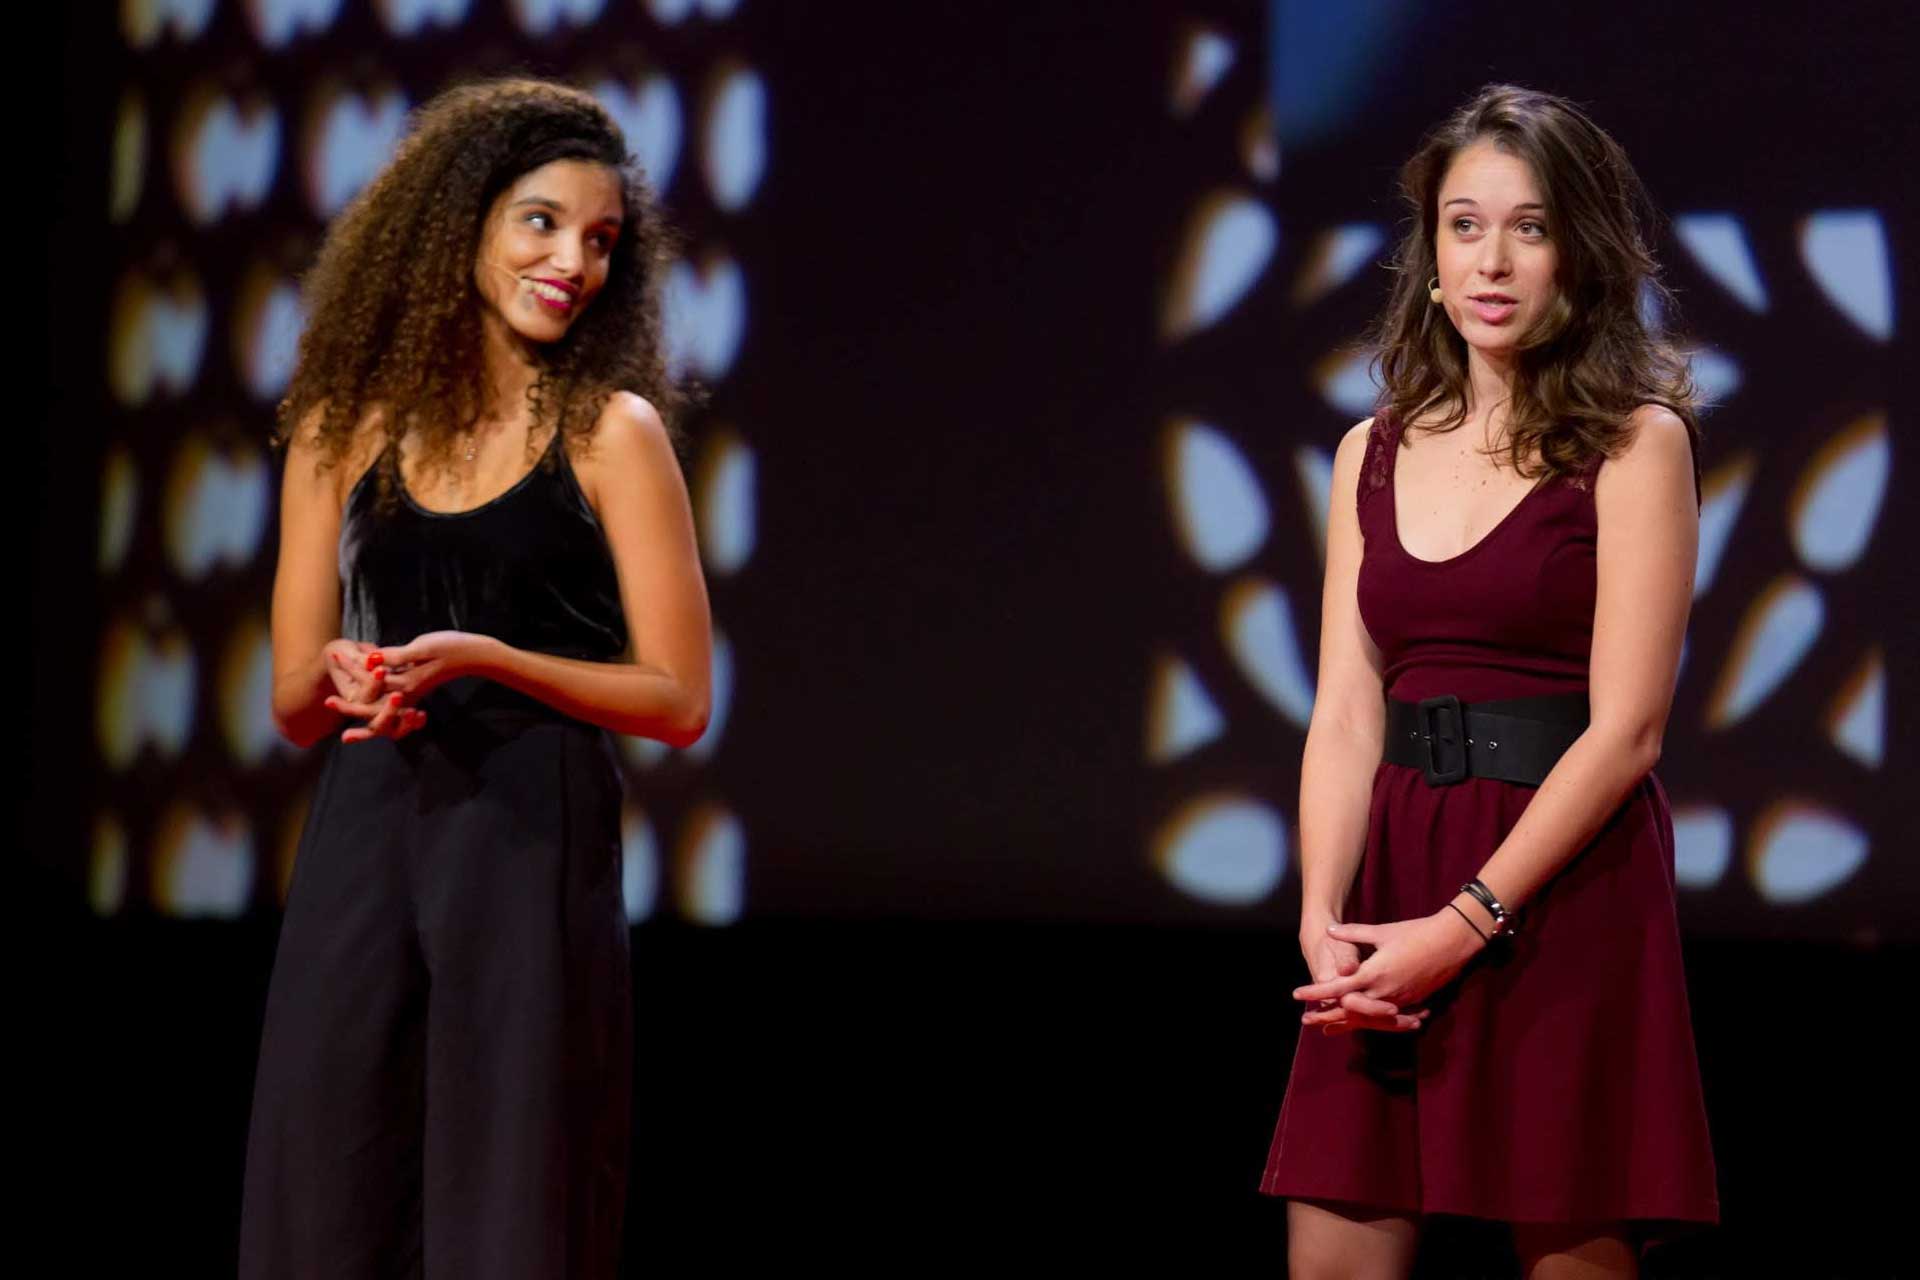 conference-TEDxParis-2015-5.jpg